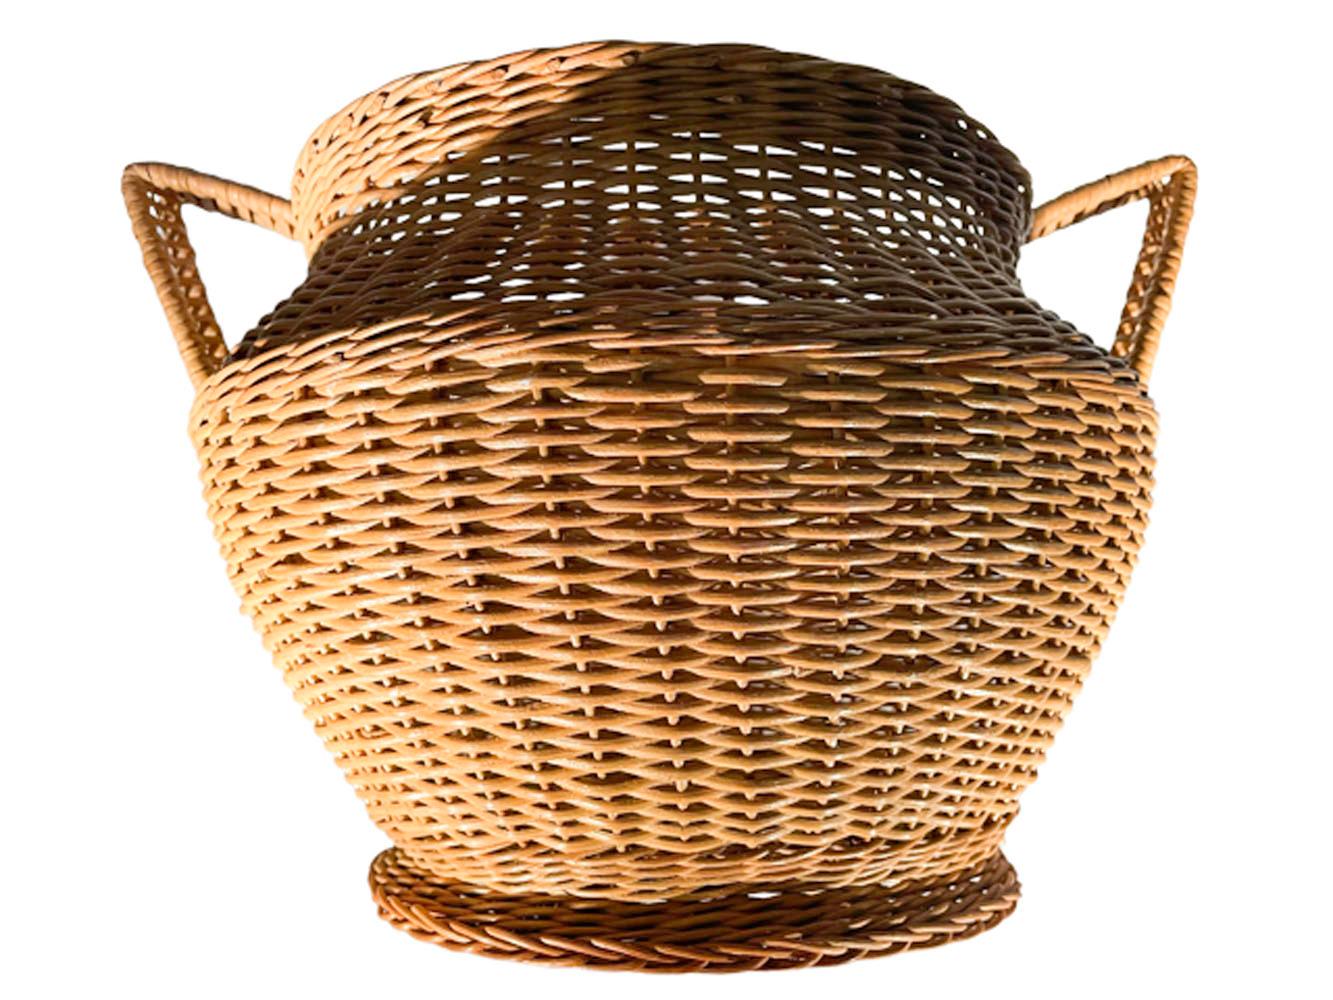 Large Art Deco wicker cachepot / planter with angular handles connecting to the rim and shoulder in pale natural color cane and retaining its original Haywood-Wakefield label. Excellent condition.
Overall:
11.5